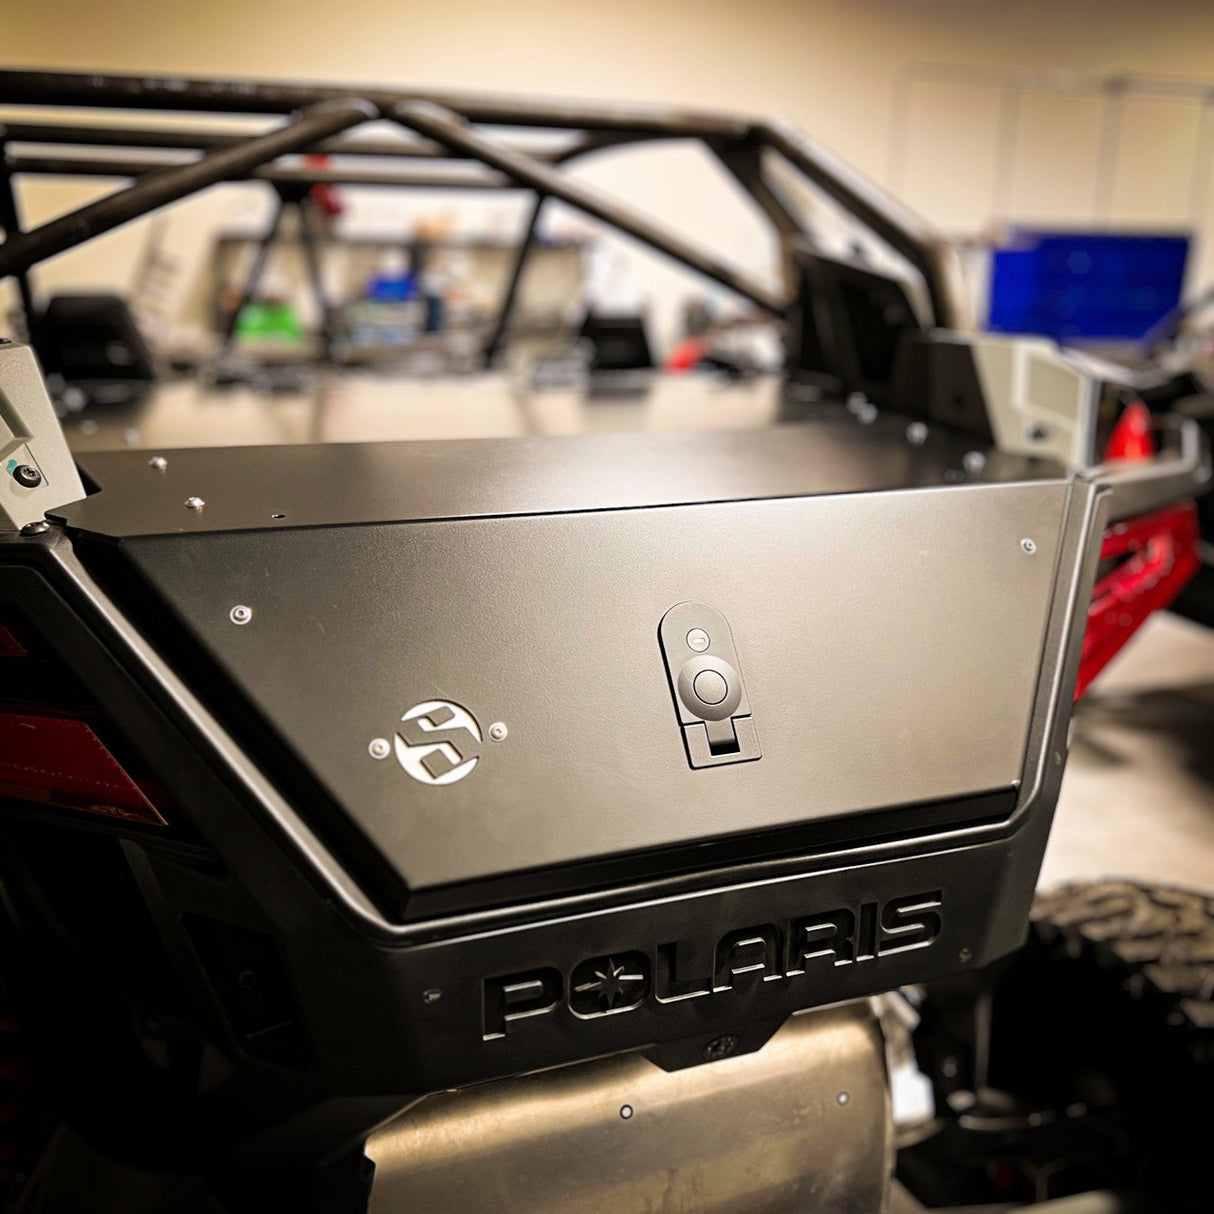 SDR RZR Pro XP / Turbo R/ Pro R Non-Vented Rear Bed Cover